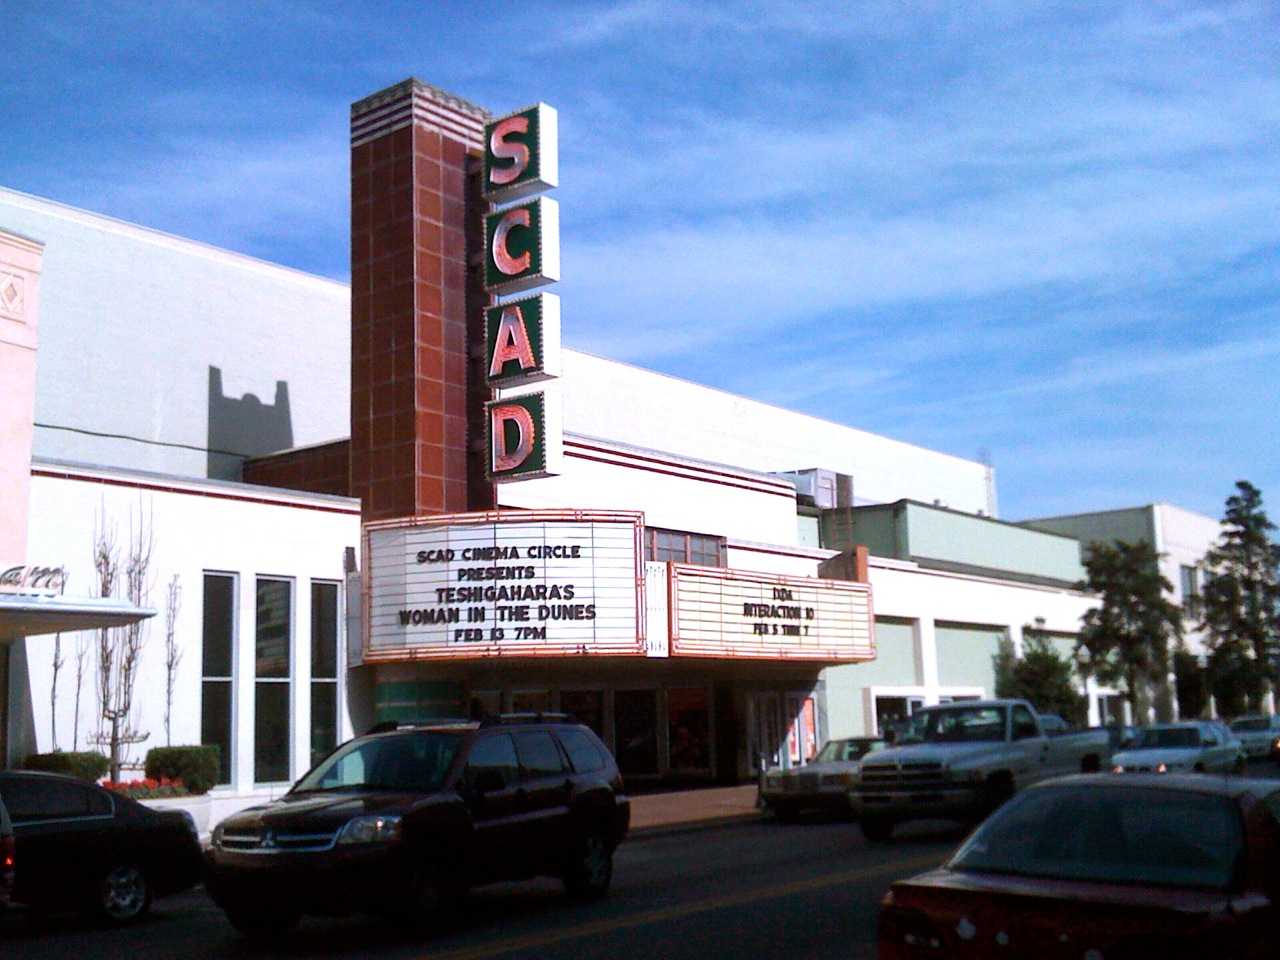 SCAD theater